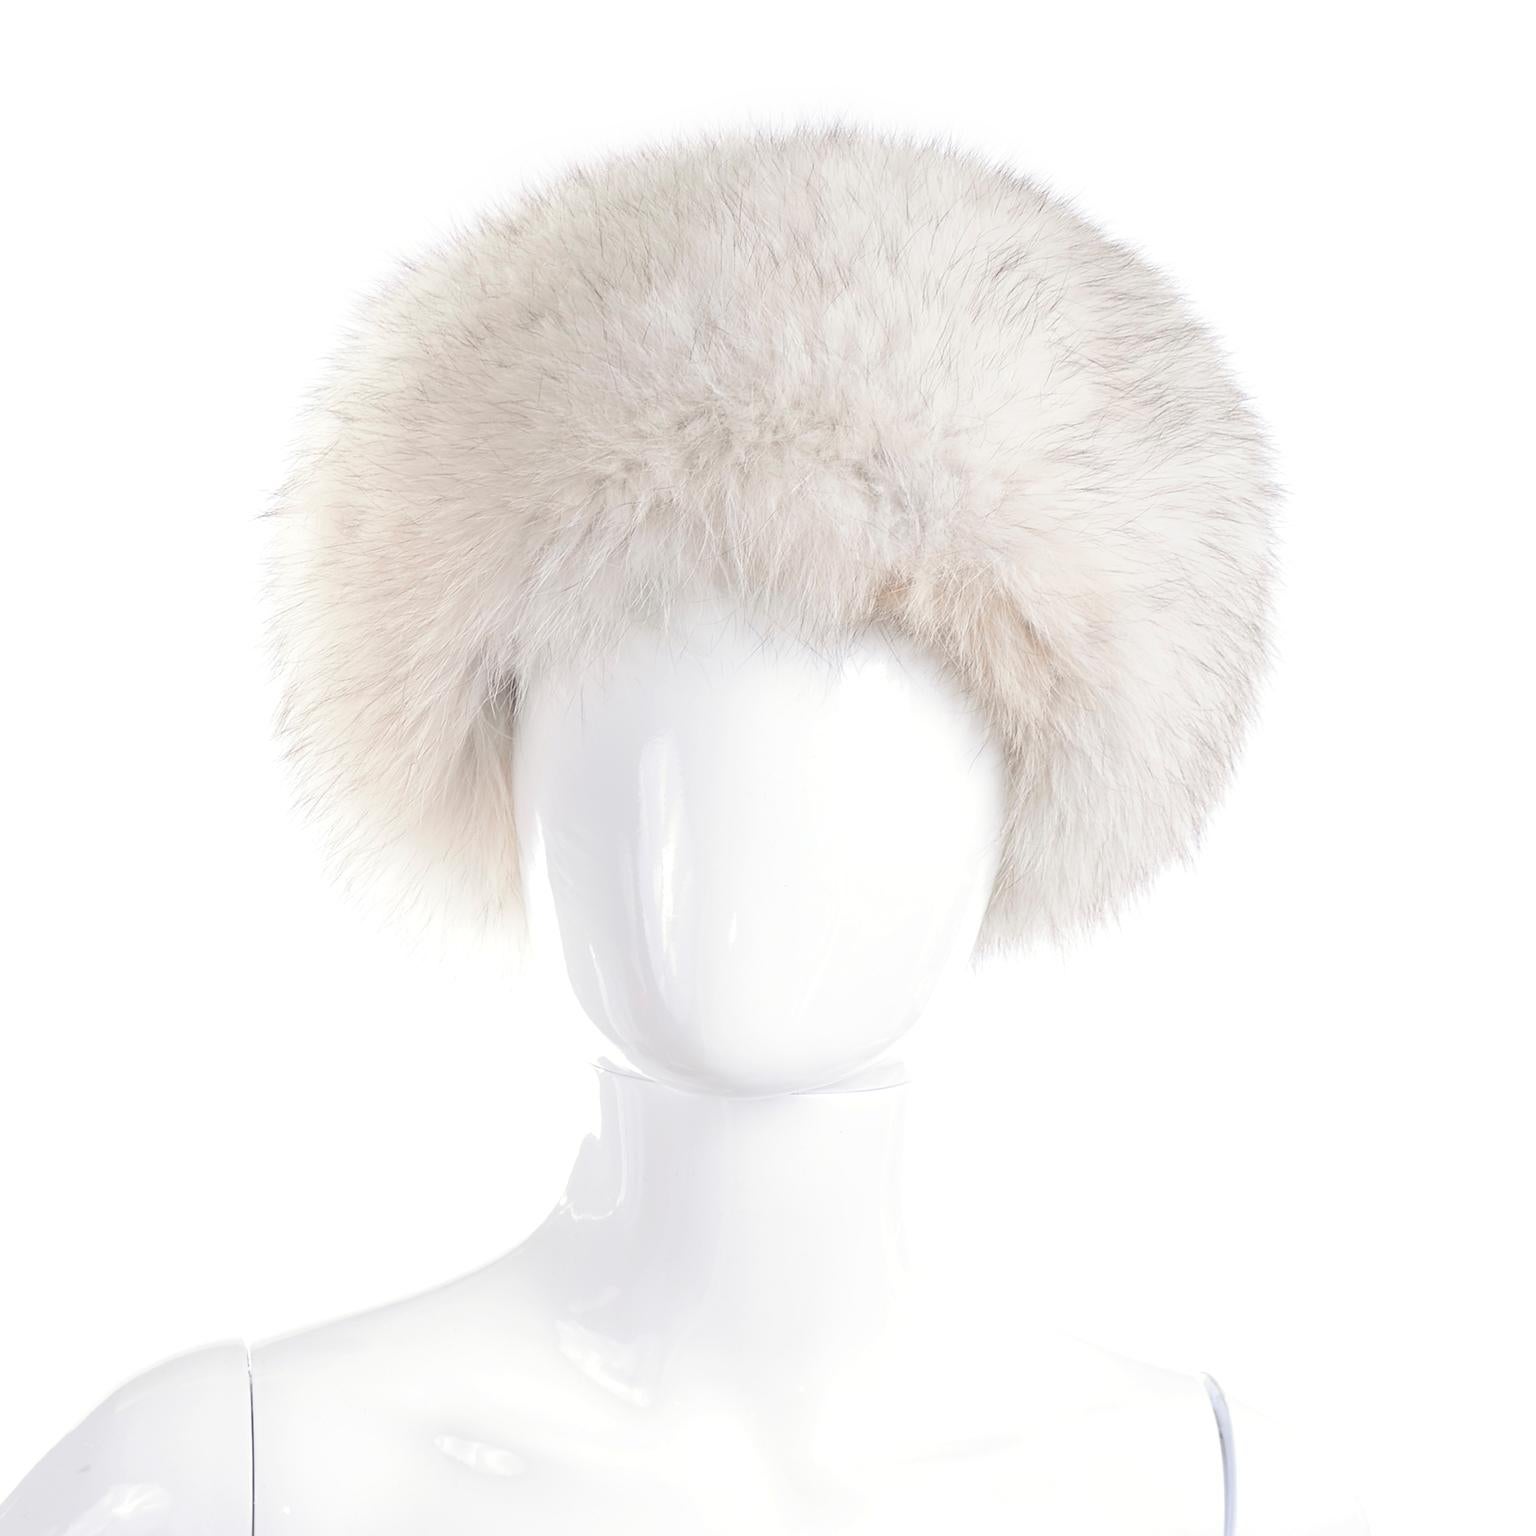 This is a vintage fur hat designed by James McQuay. McQuay called himself 